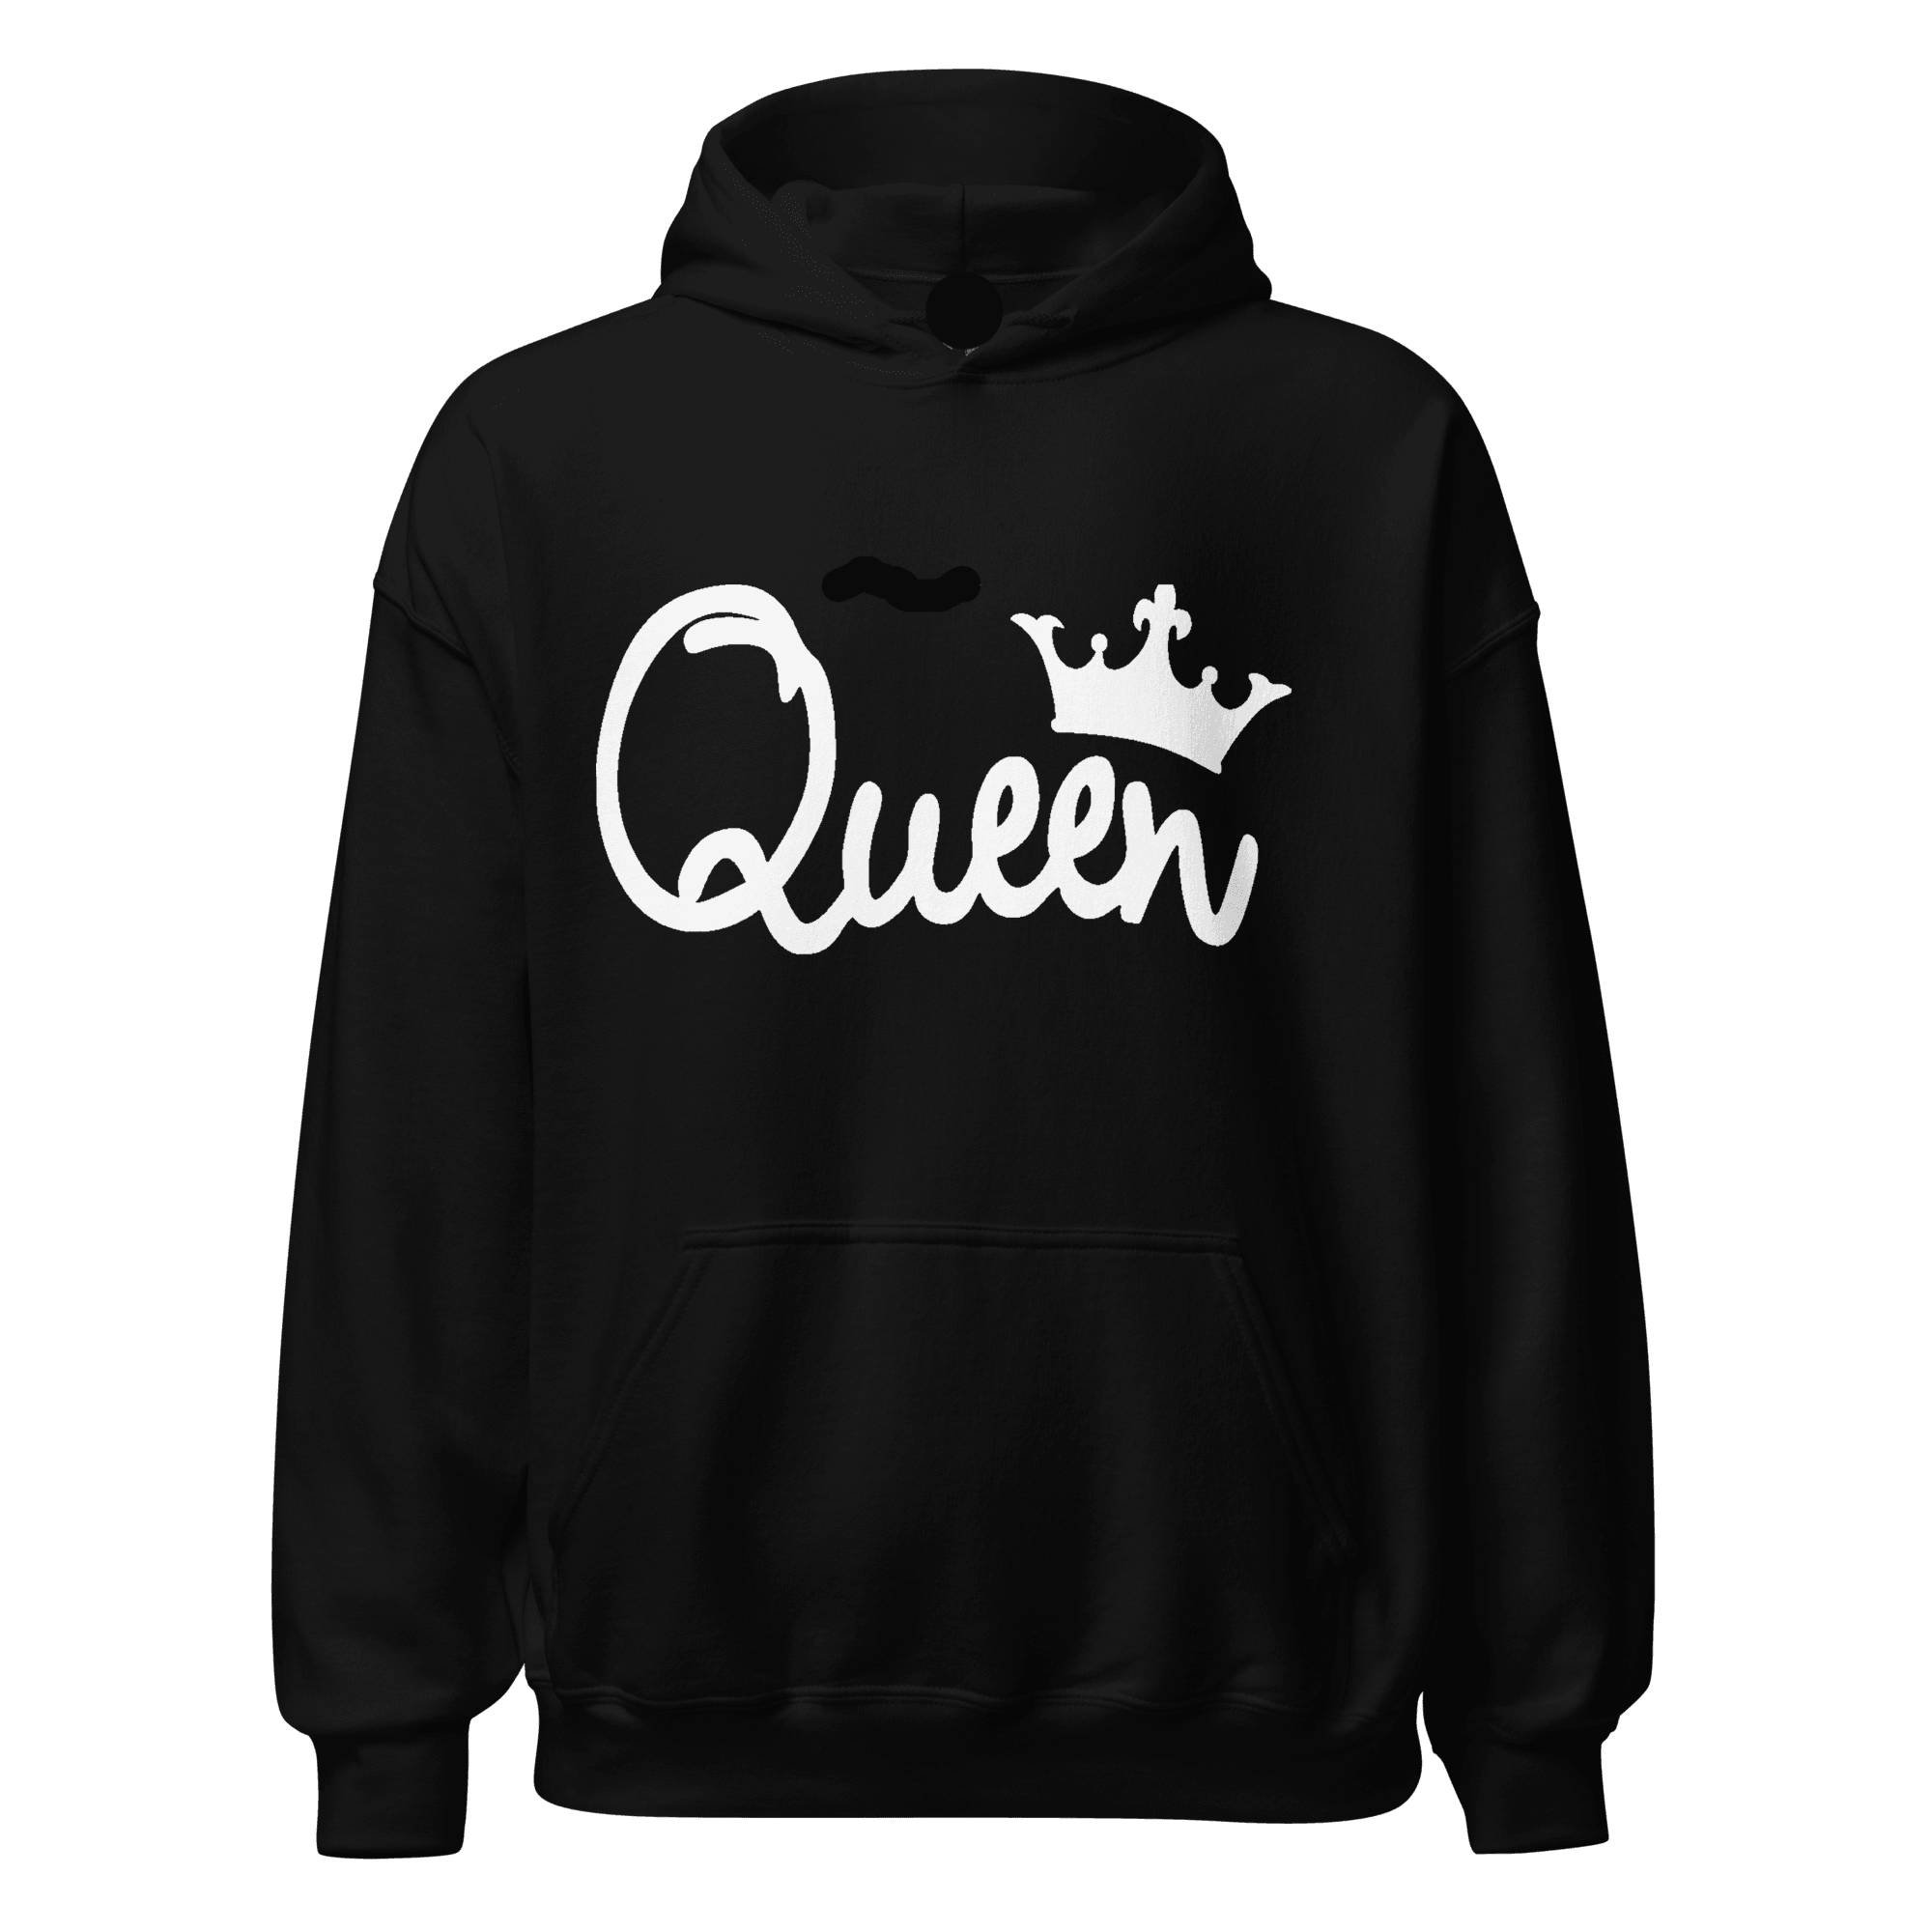 King/Queen in White Script Relationship Hoodies Set Ultra Soft Midweight Fabric Pullovers - TopKoalaTee